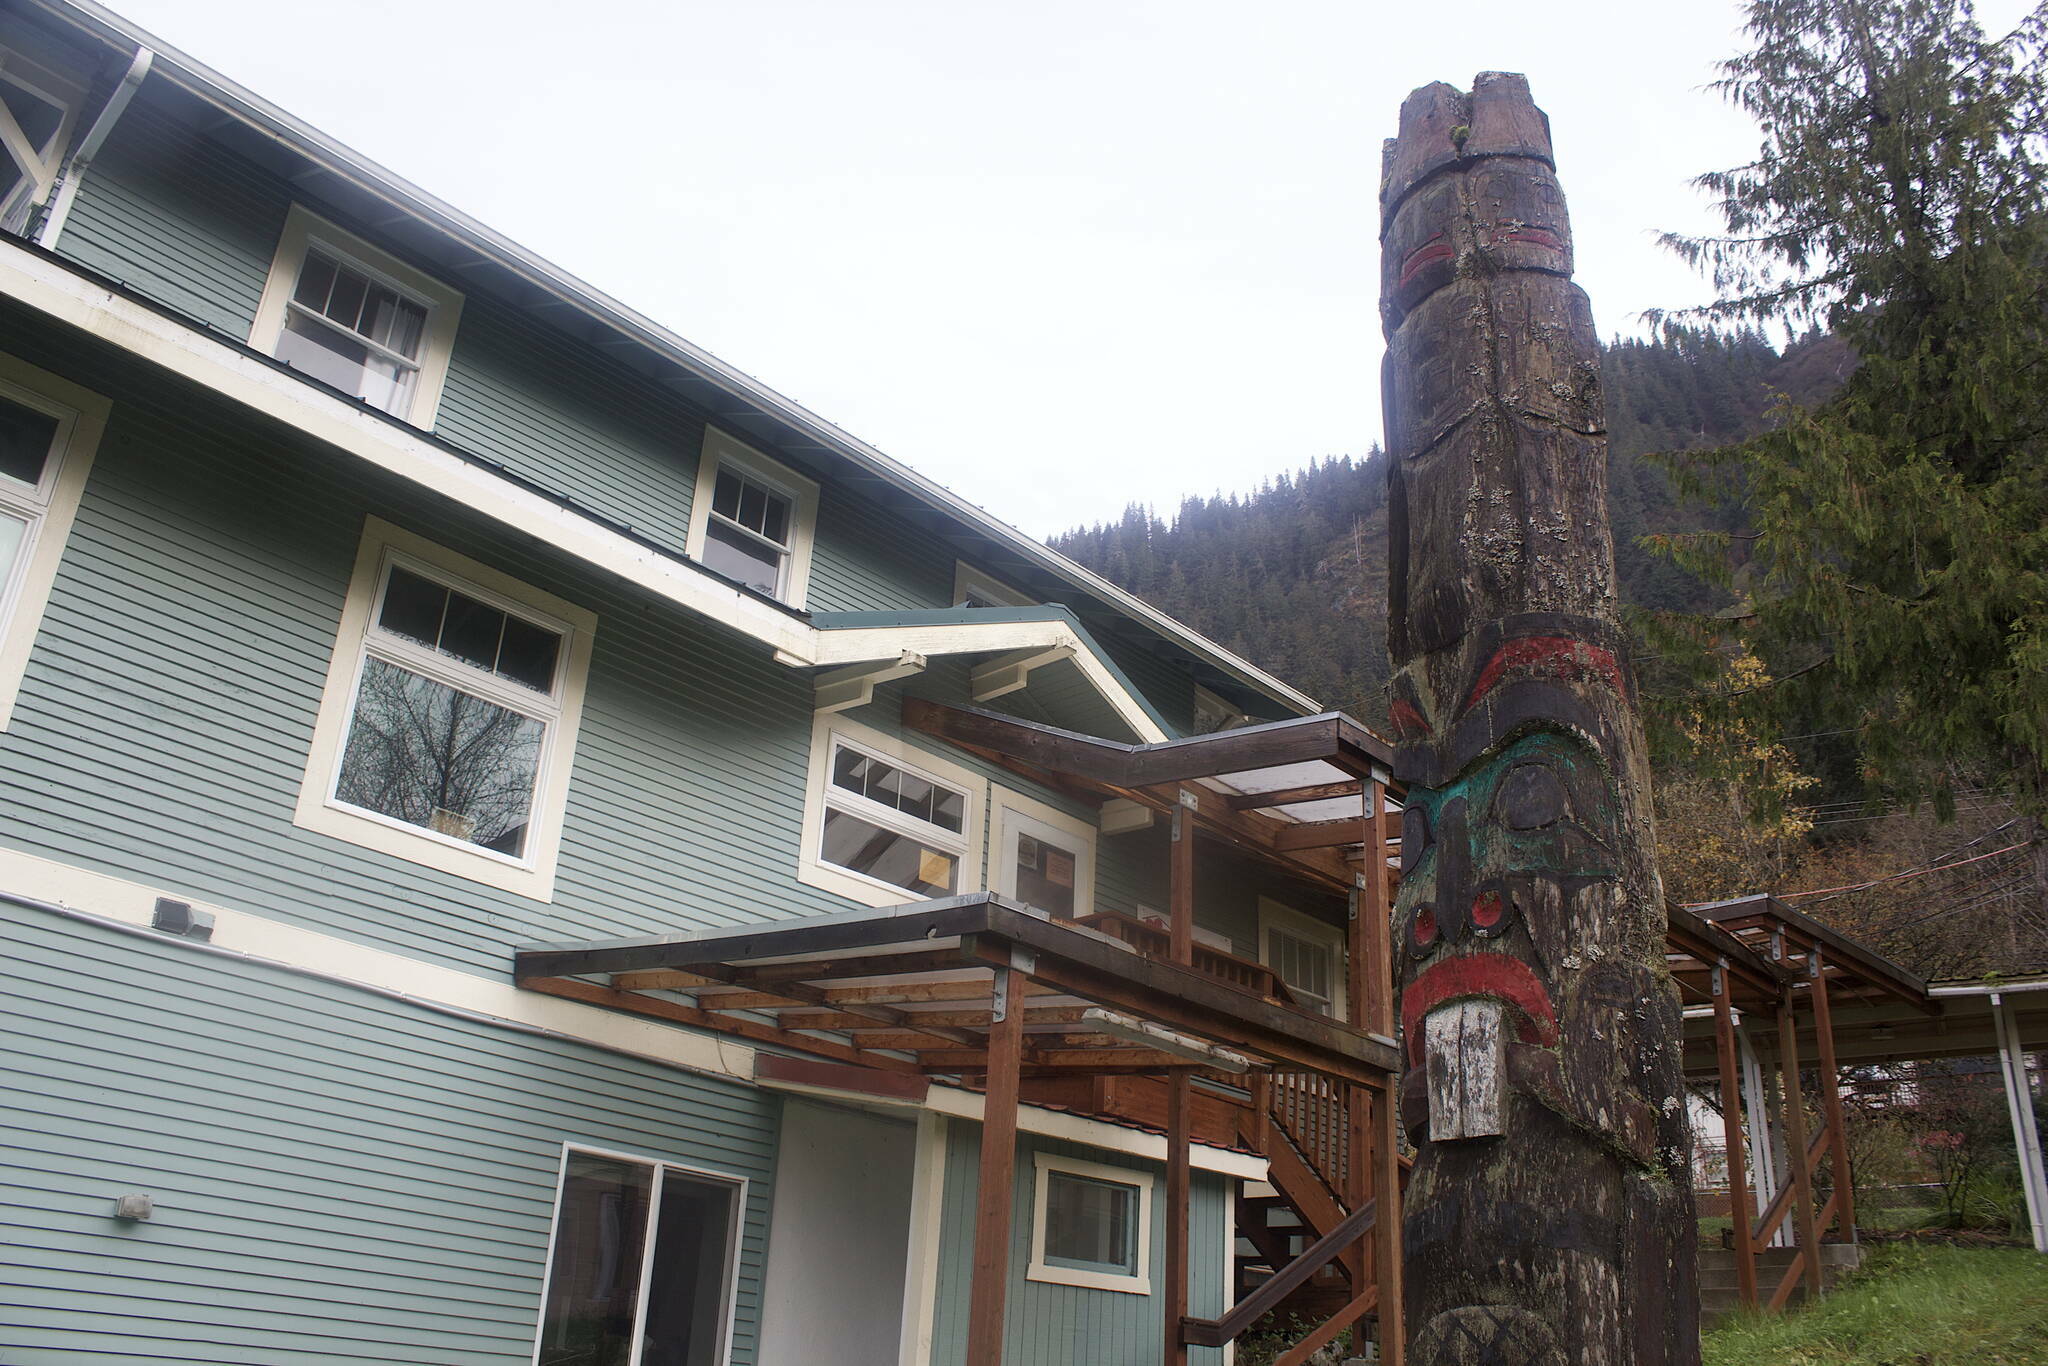 A totem stands outside the former Hospice and Home Care of Juneau on Oct 14, 2022. The facility shut down days later after providing services for about 20 years. (Mark Sabbatini / Juneau Empire)